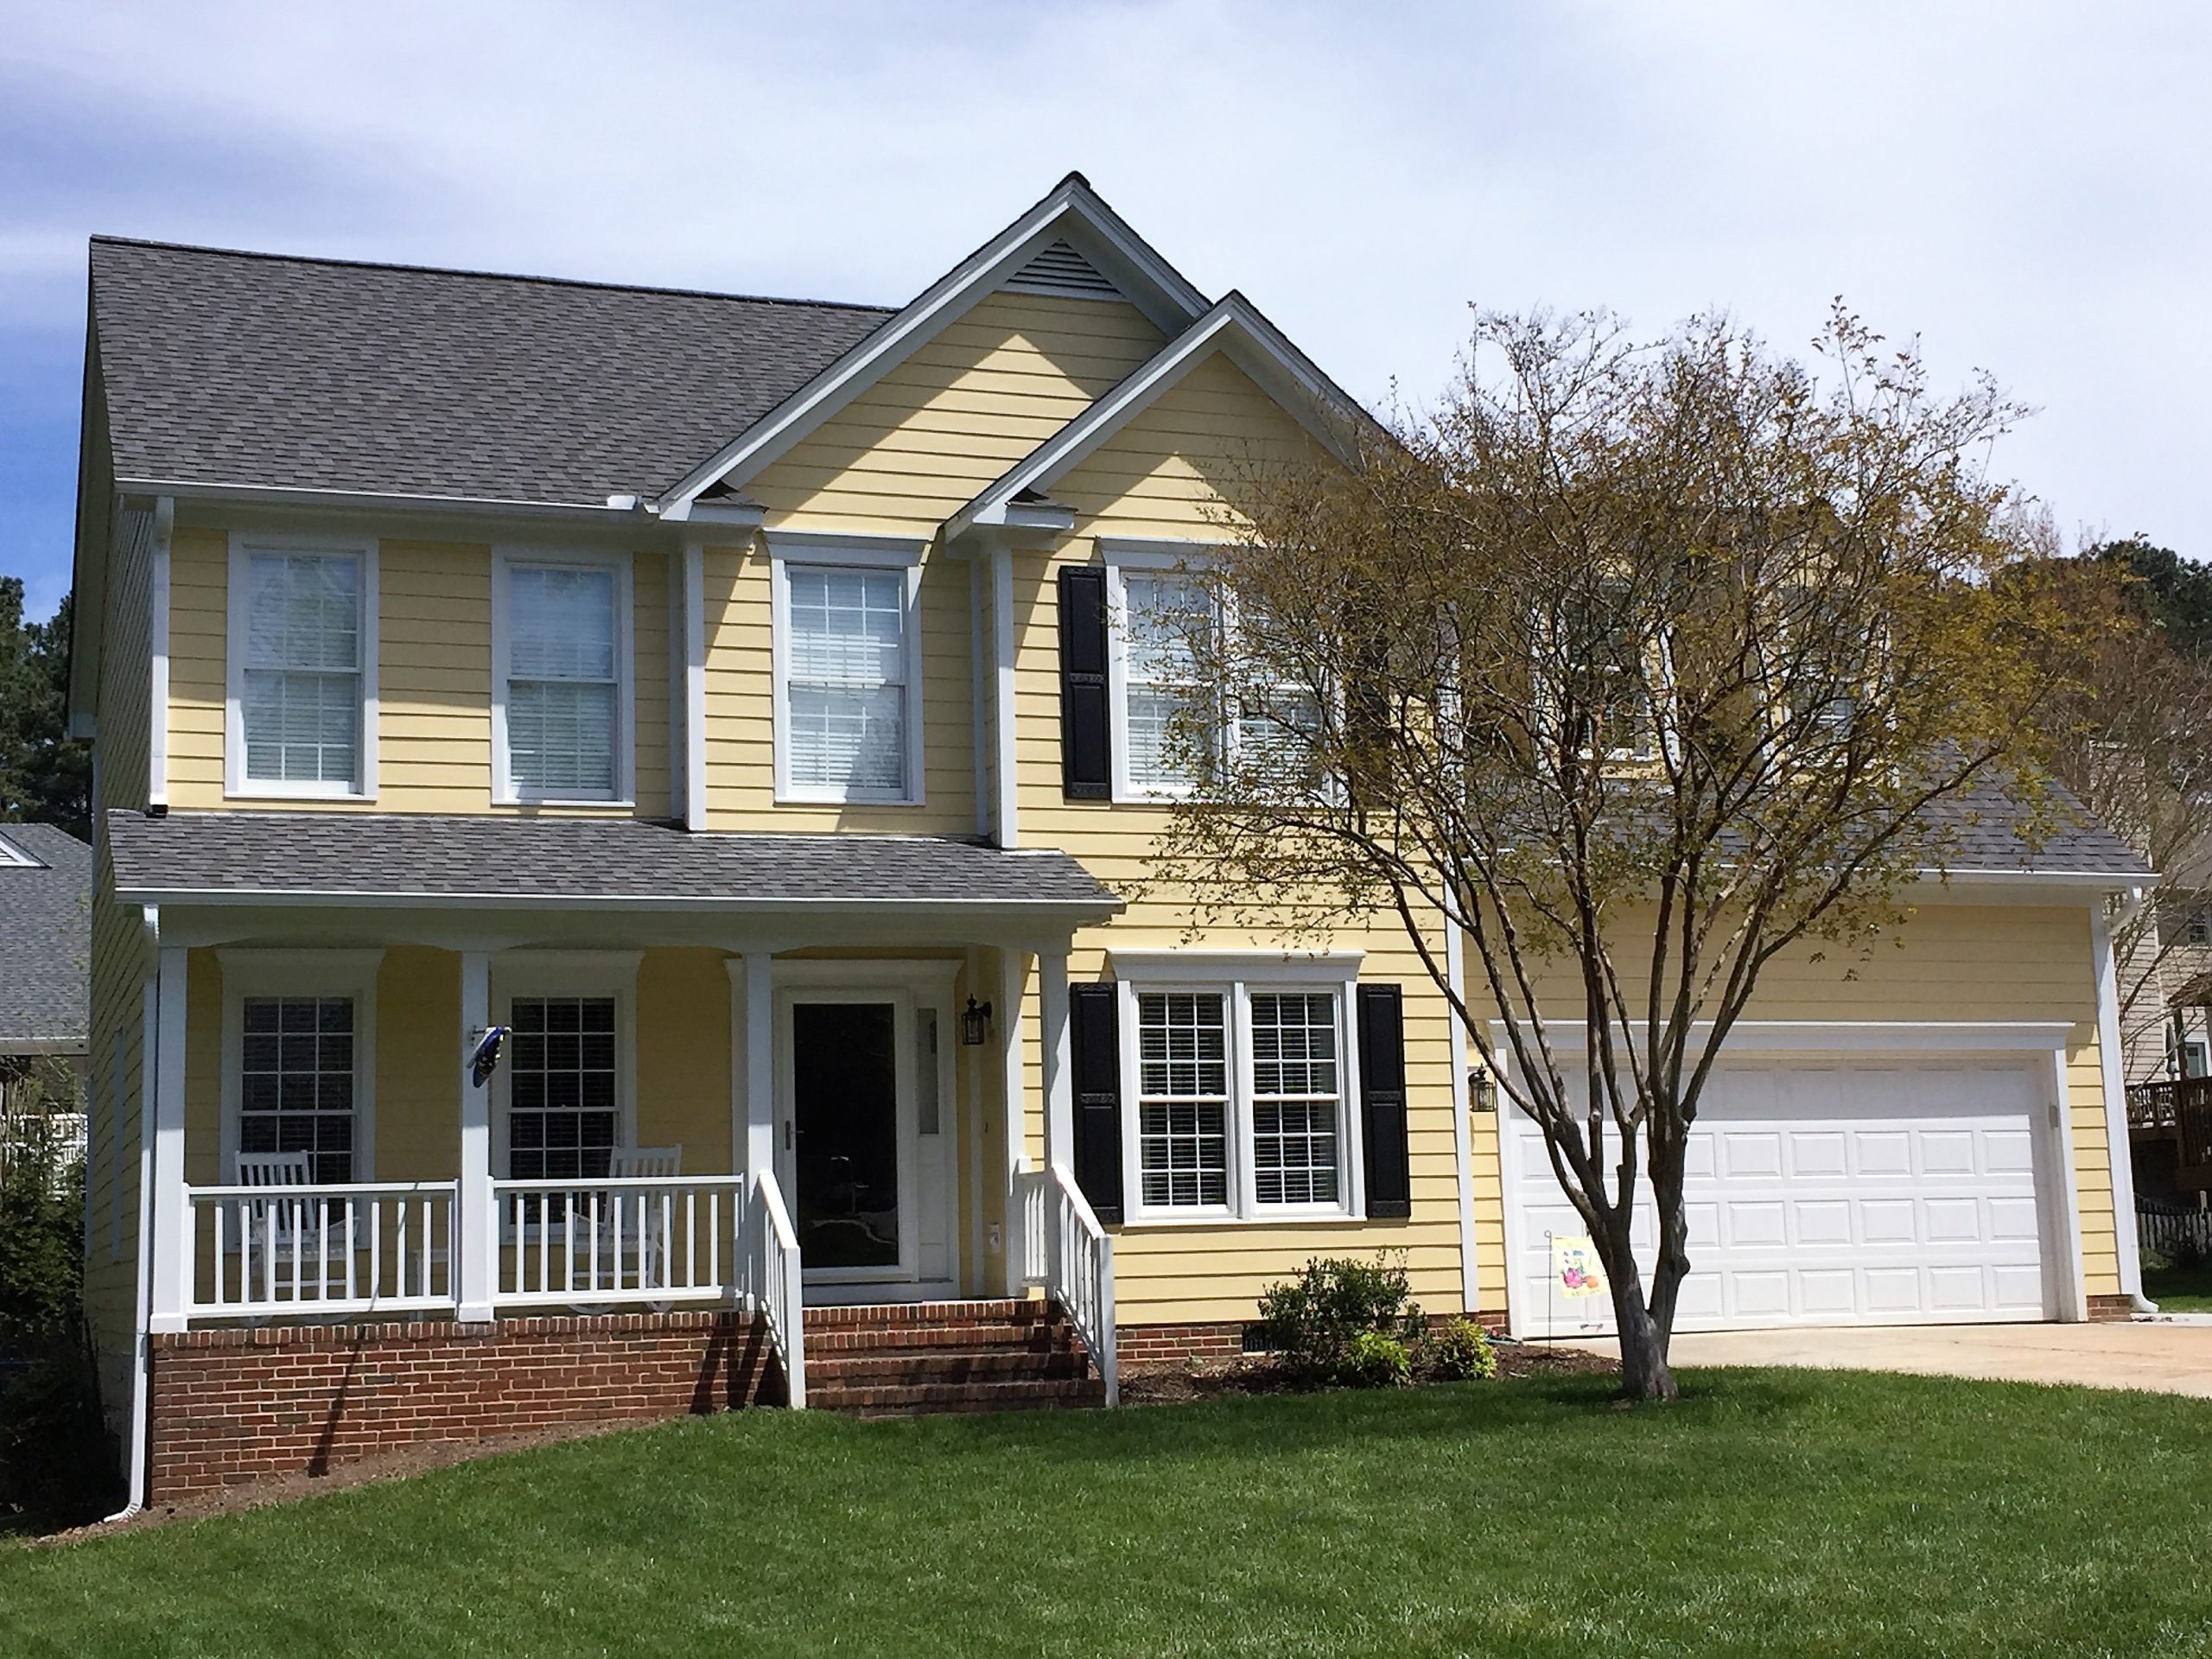 Scott & Stephanie R. – Raleigh James Hardie Siding & Roof Replacement